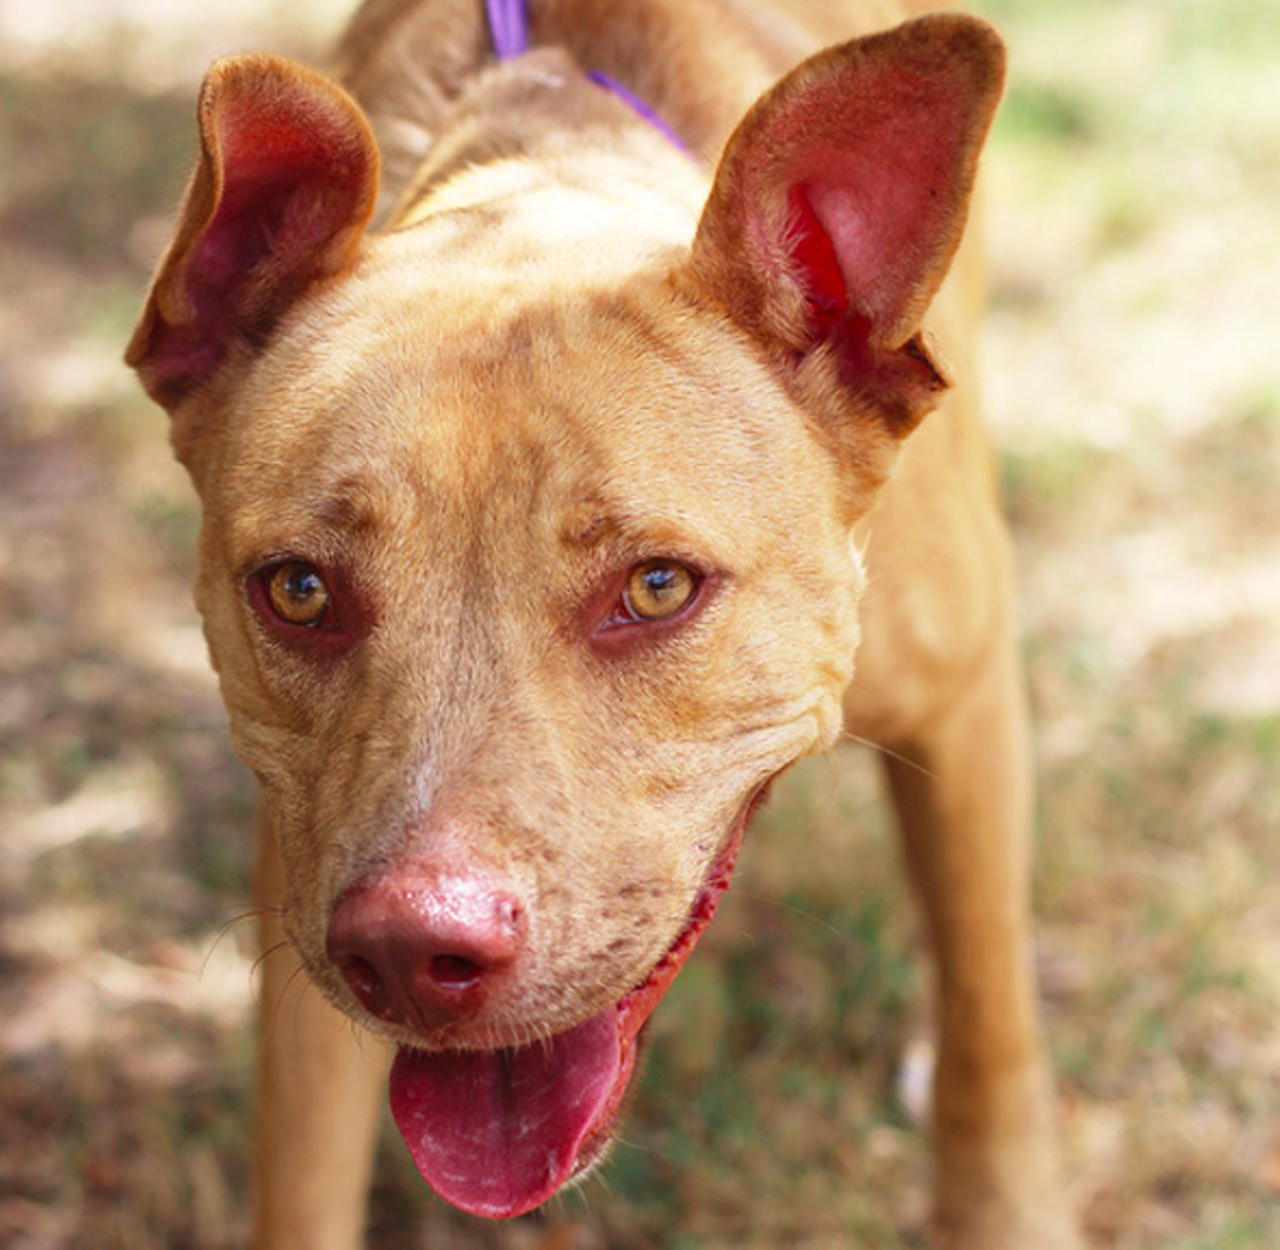 Roux
"Howdy! I’m a very energetic girl who loves walks on the beach and attention. I love to smell everything on sight because I’m a very curious pup. If you think you’re the one for me, then why wait any longer, come meet me ASAP!"